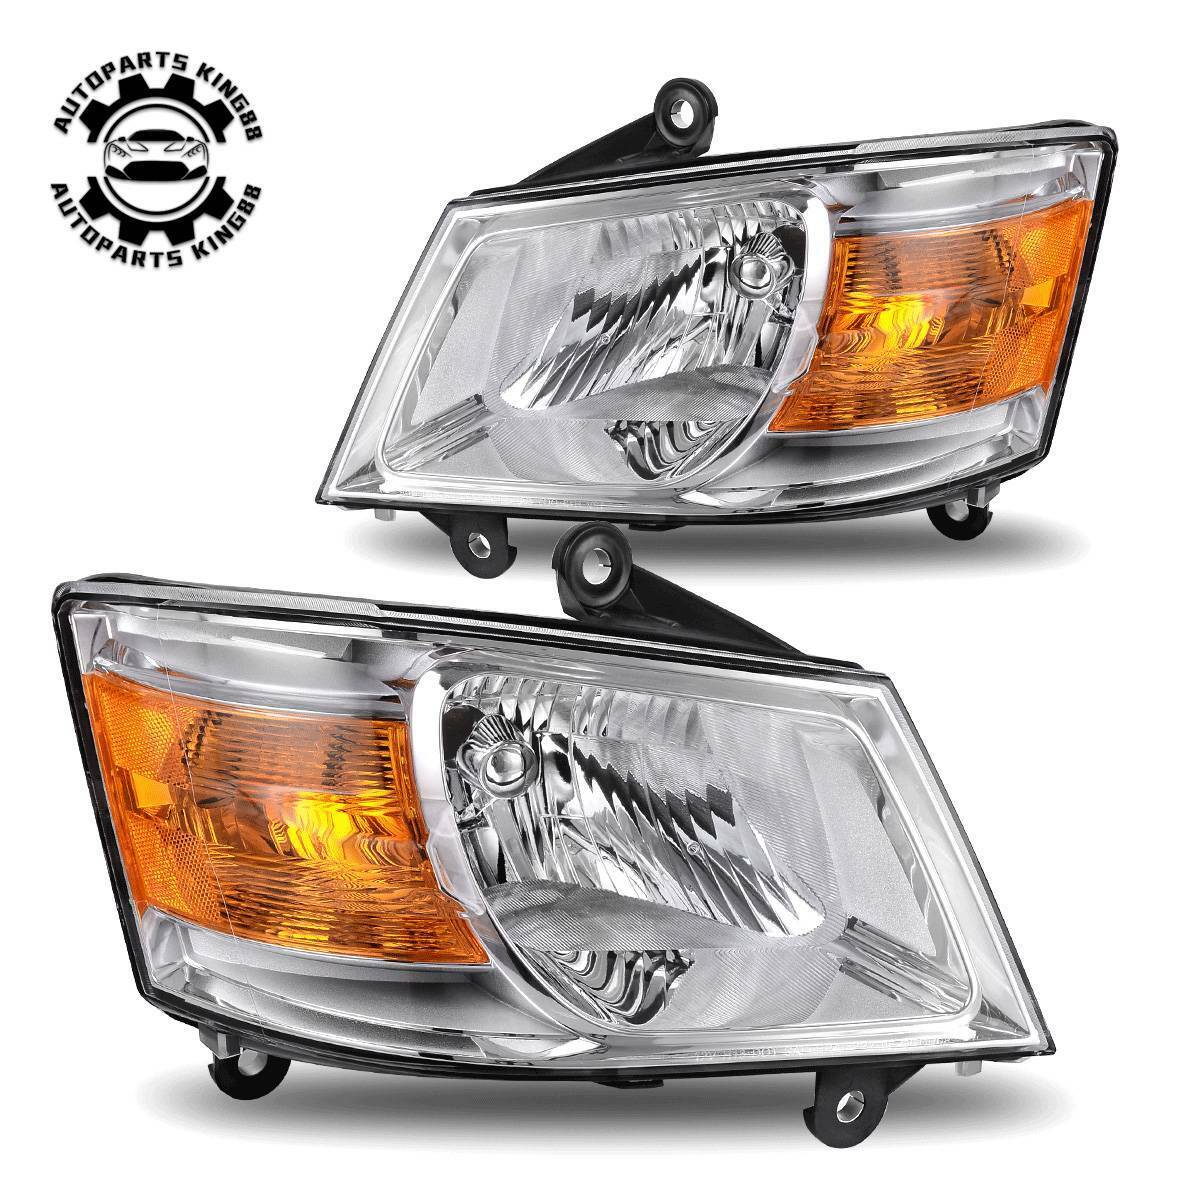 Headlights Assembly For 2008 -2010 Dodge Grand Caravan 08-10 Replacement Lamps